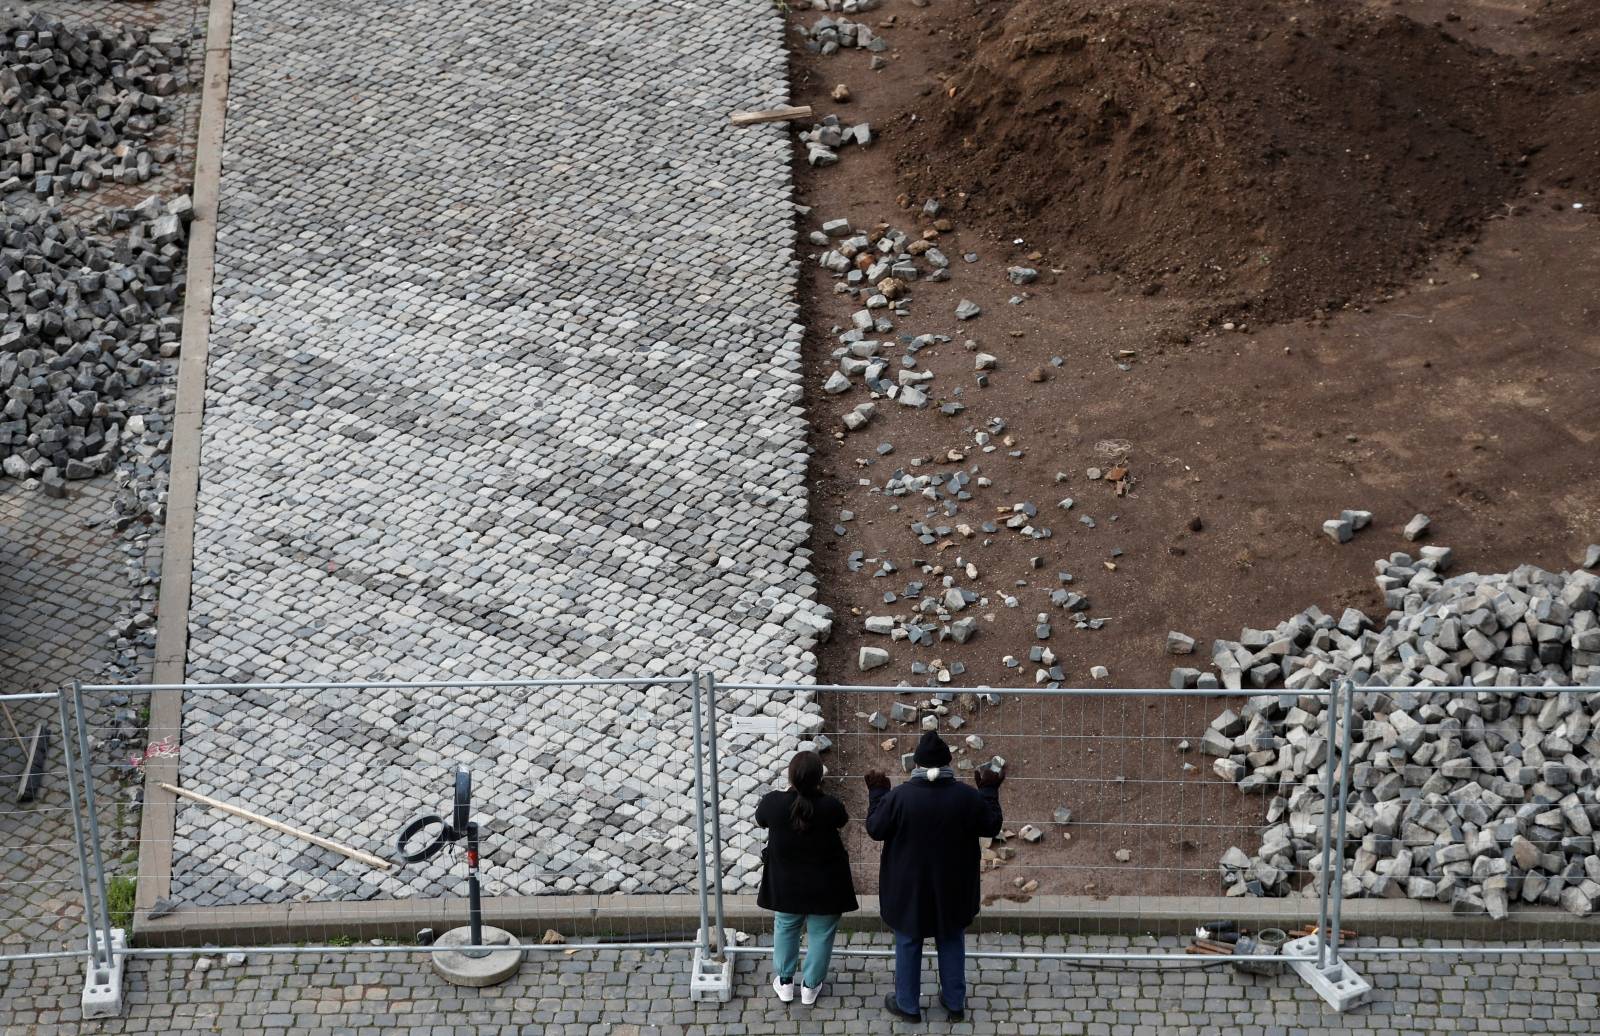 People look through a fence by the Colosseum, where work is being carried out to replace traditional cobblestones, in Rome